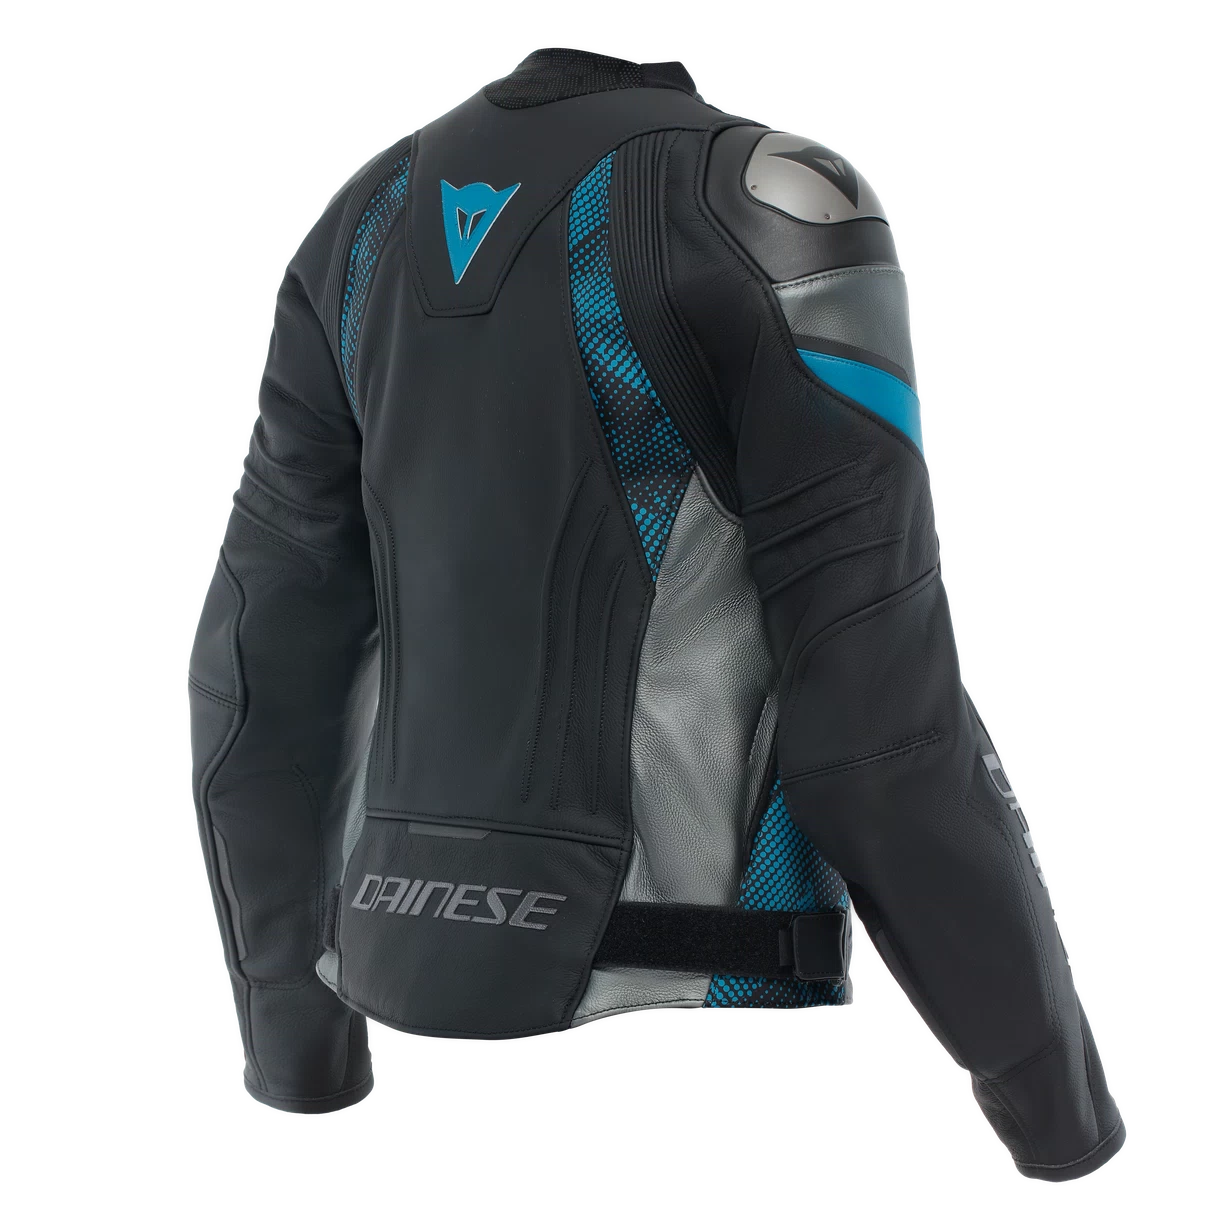 CHAQUETA DAINESE AVRO 5 LADY black/teal/anthracite